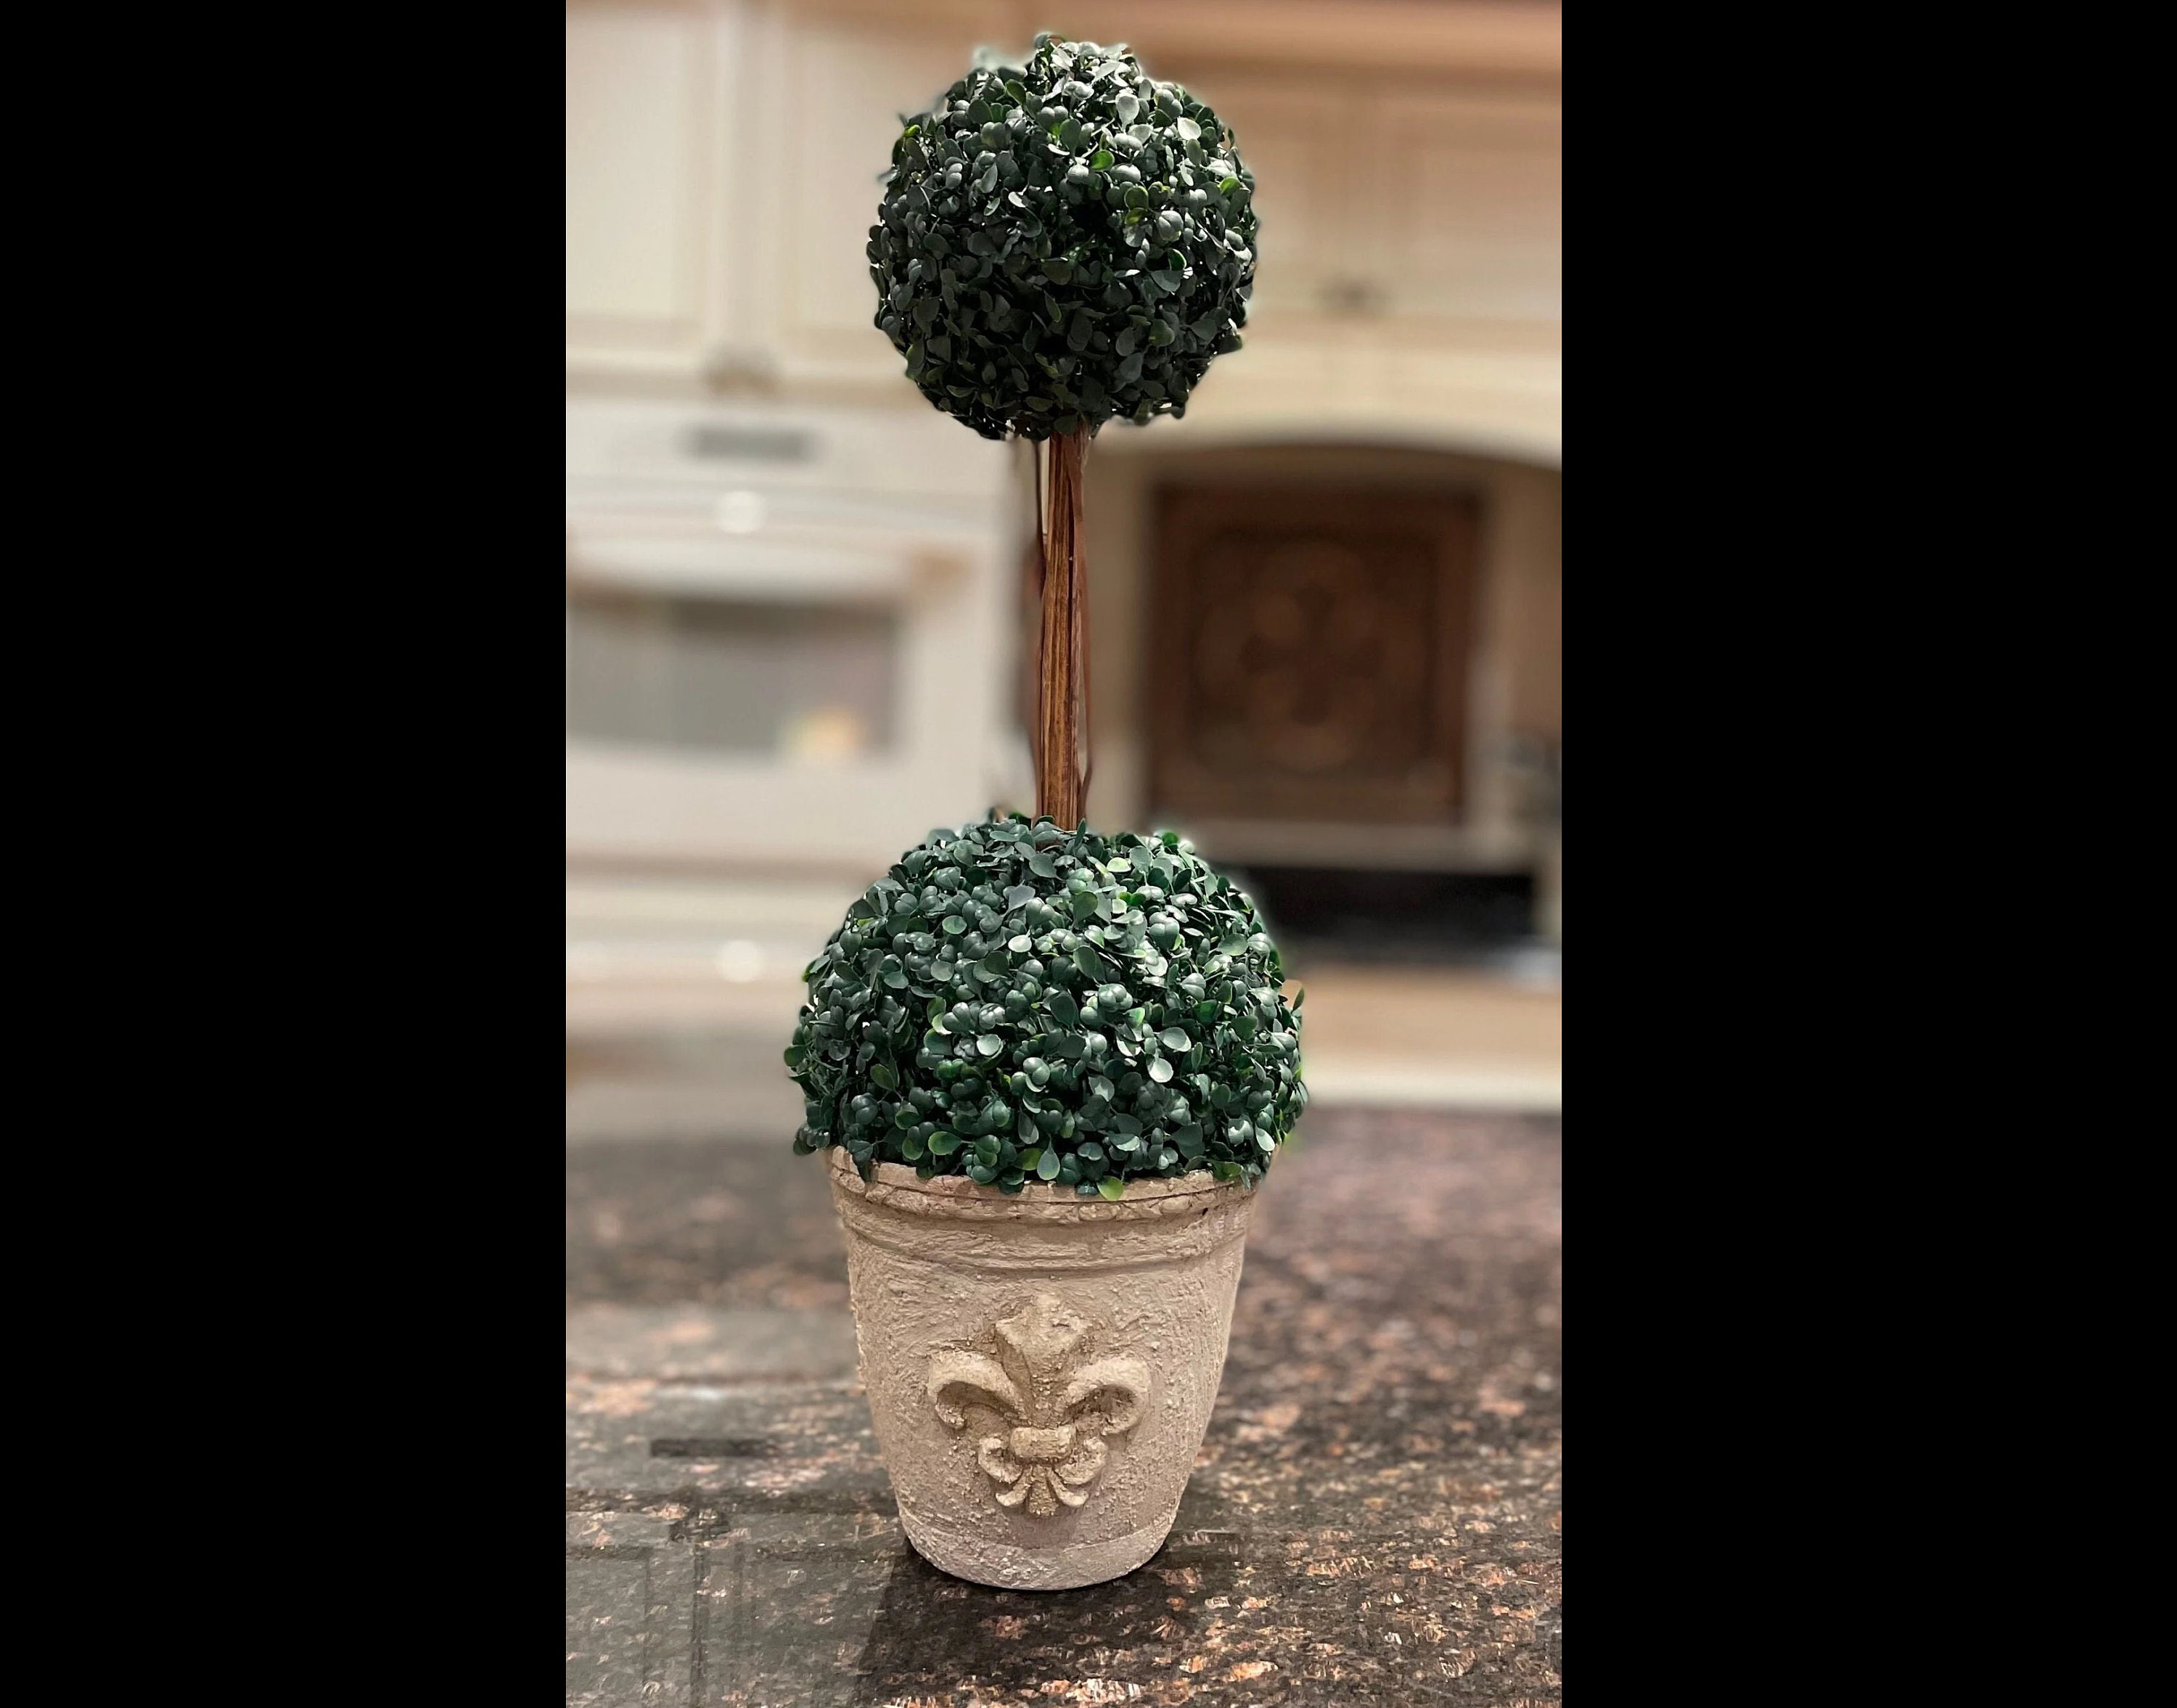 1pc Hanging Topiary Ball Boxwood Topiary Ball Artificial Topiary Plant  Decorative Balls For Wedding Decor Indoor Outdoor Backyard Balcony Garden  Decor Artifical Flower Uv Resistant Fake Plants Faux Plastic Floral Greenery  Shrubs